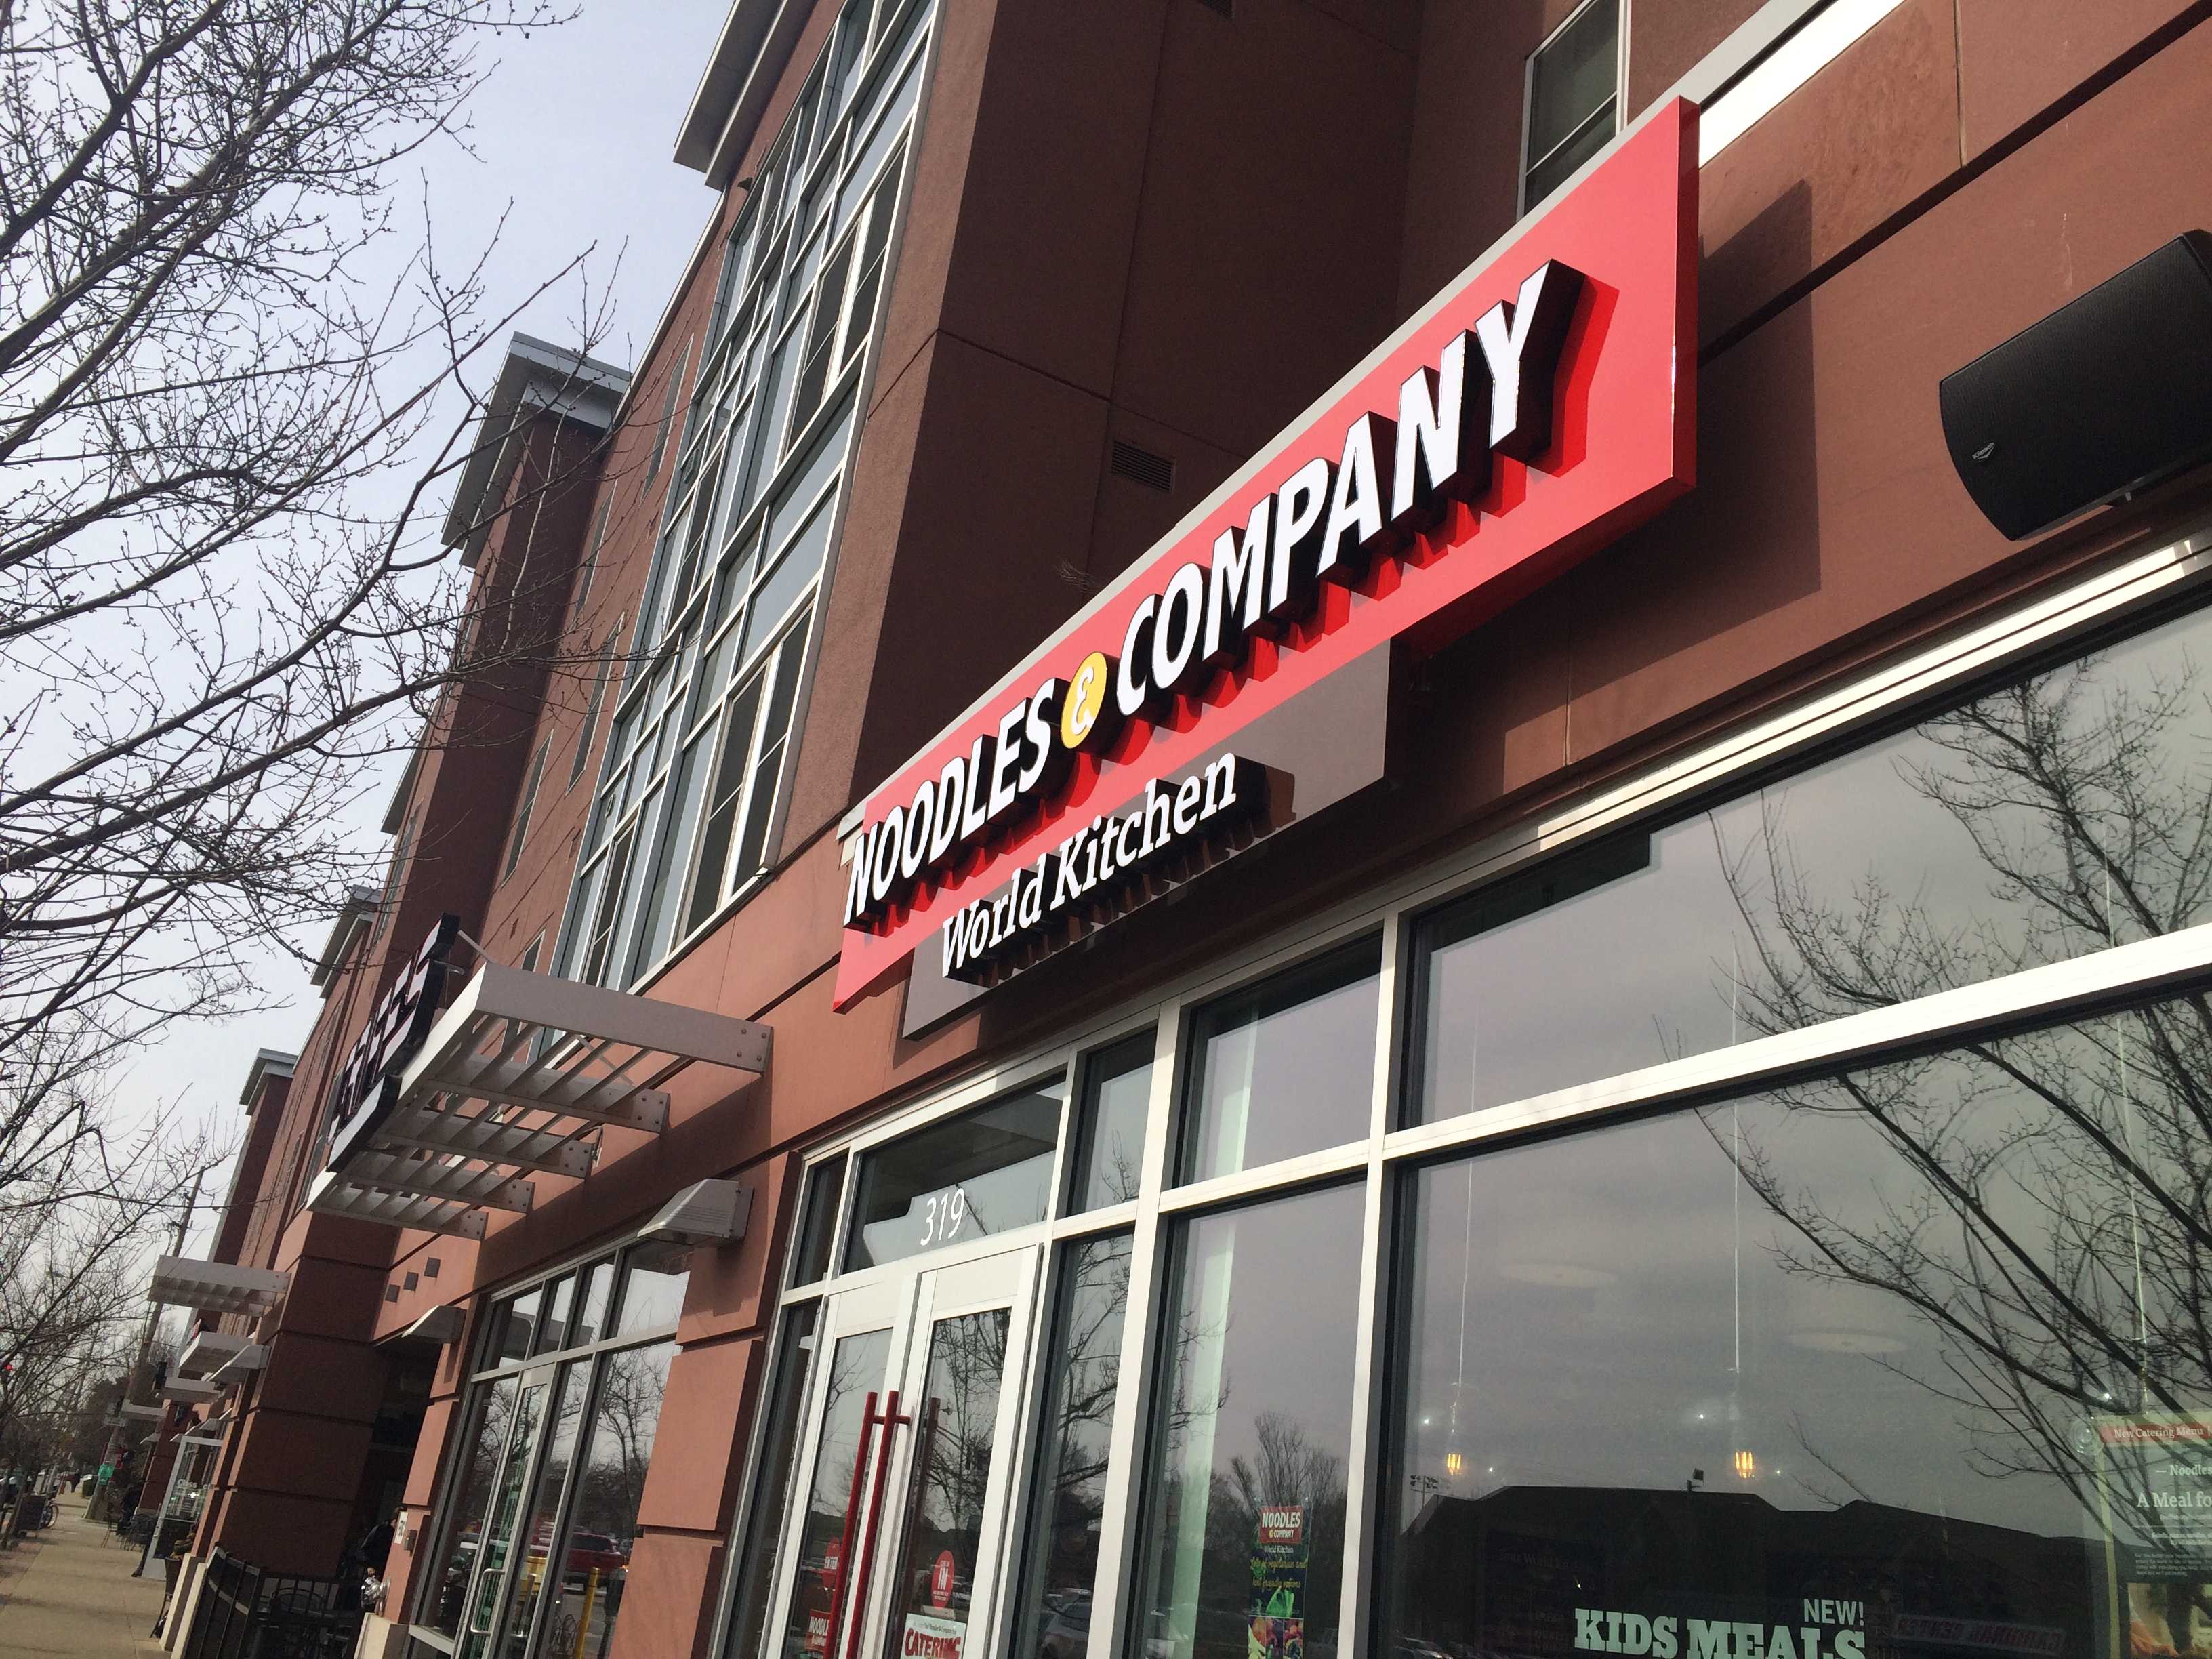 Restaurant chain Noodles and Company opens outpost in Cardinal Towne